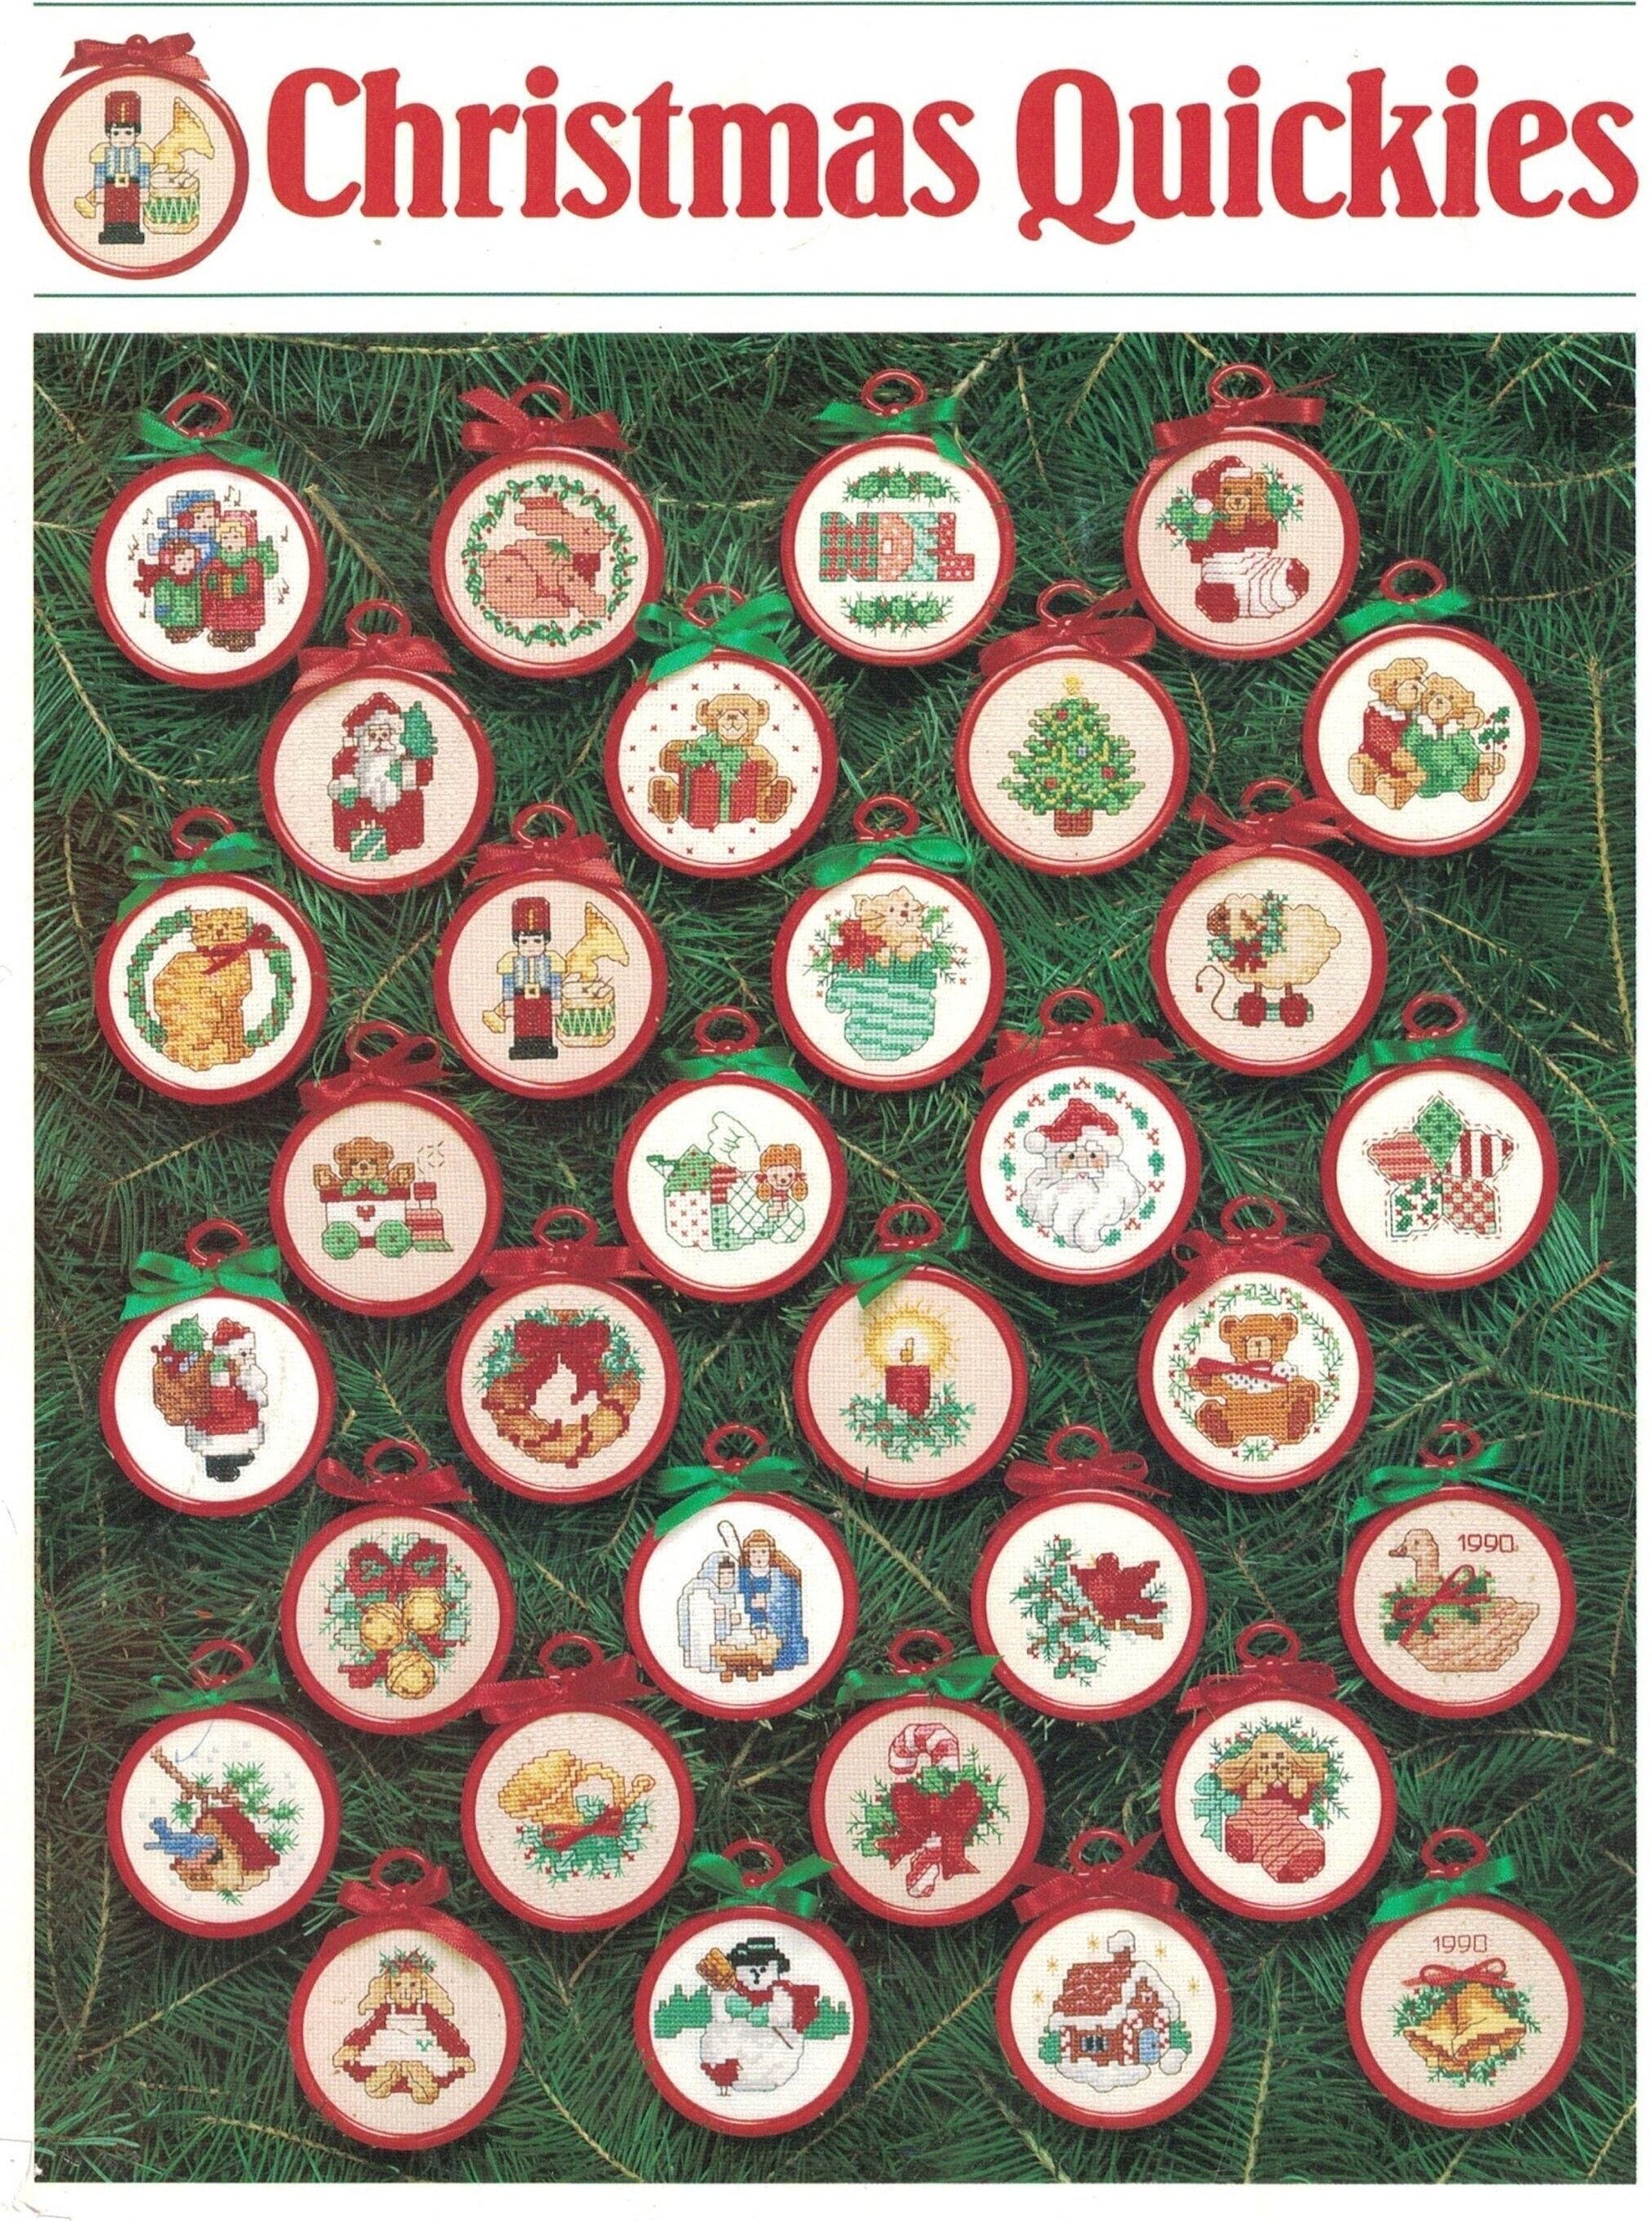 Victor's Christmas Stocking Cross Stitch Embroidery Kit from Just